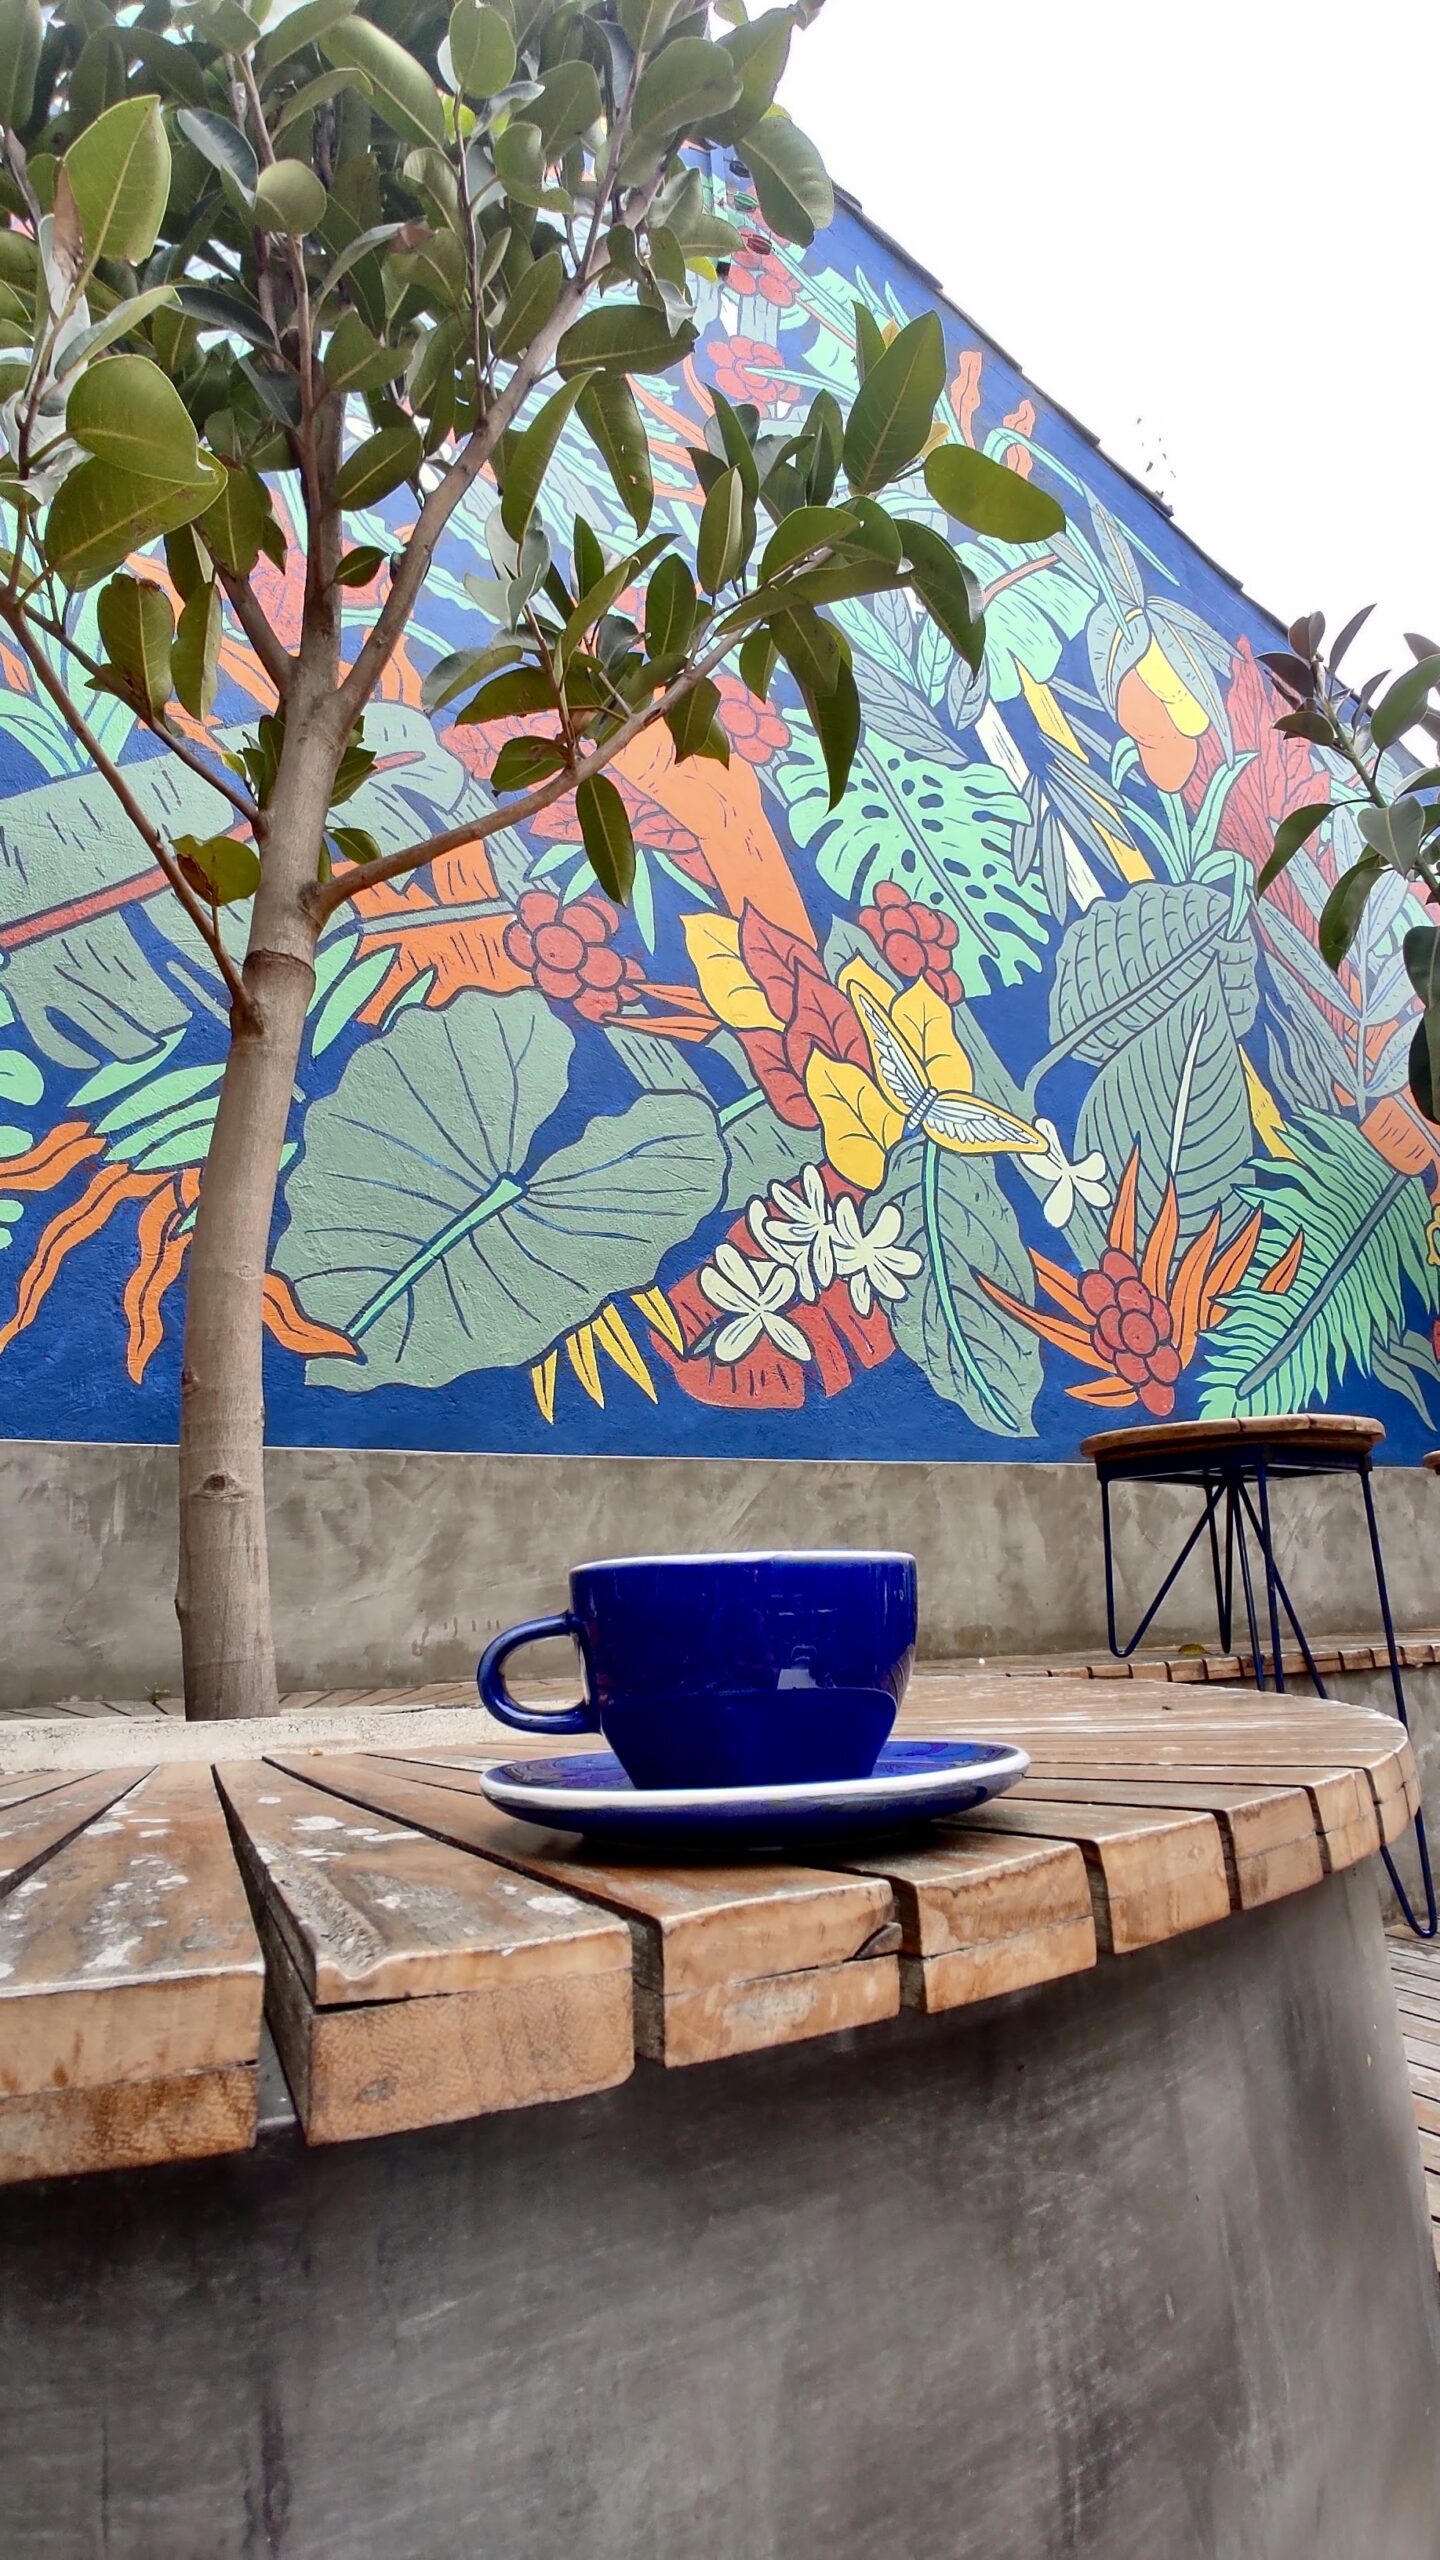 A blue coffee cup and saucer sit on a wooden table in front of a vibrant mural featuring large leaves and flowers. A small tree and a metal stool are also present, evoking the charm found in the hidden gems often highlighted on tours in Bogotá.